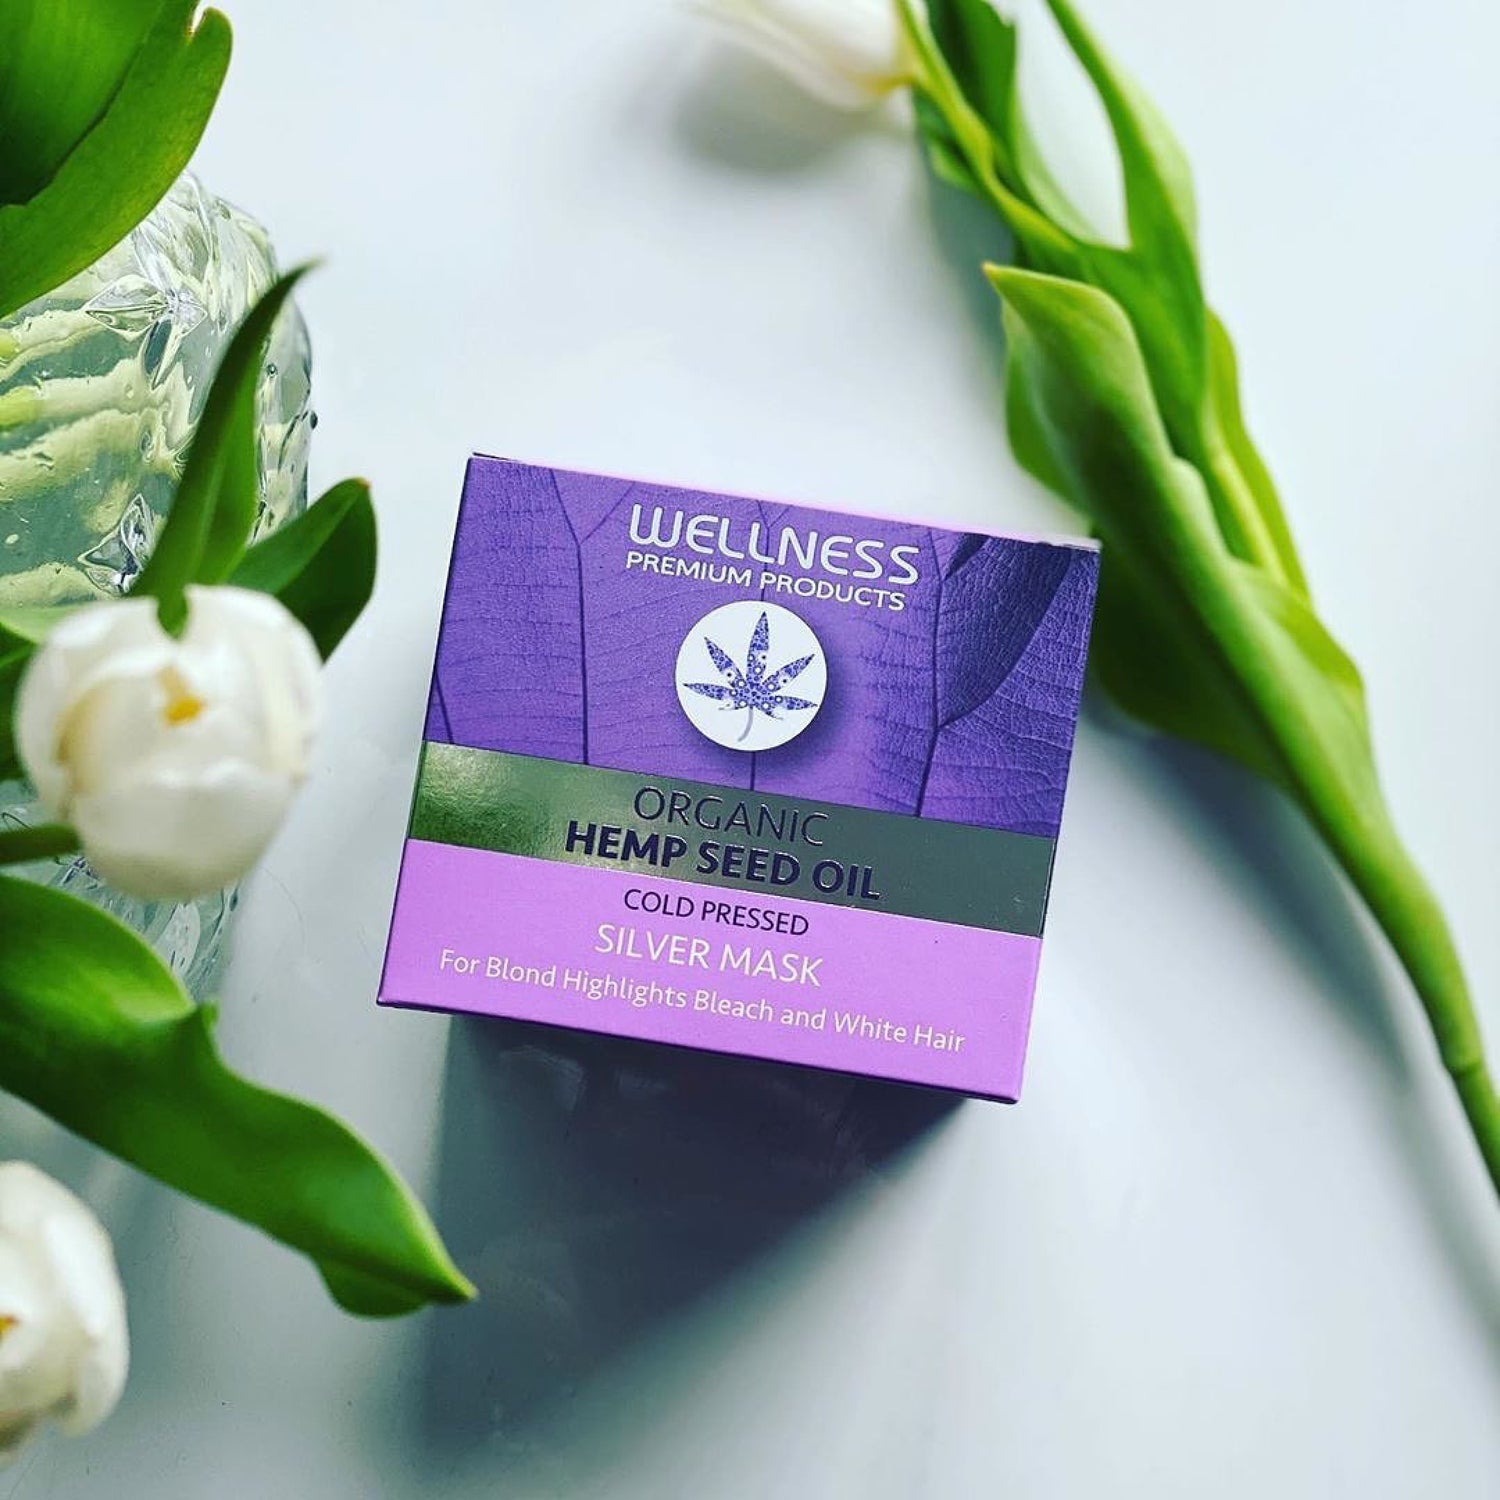 Plant-Based Purple Products That Outshine: The Wait Is Over